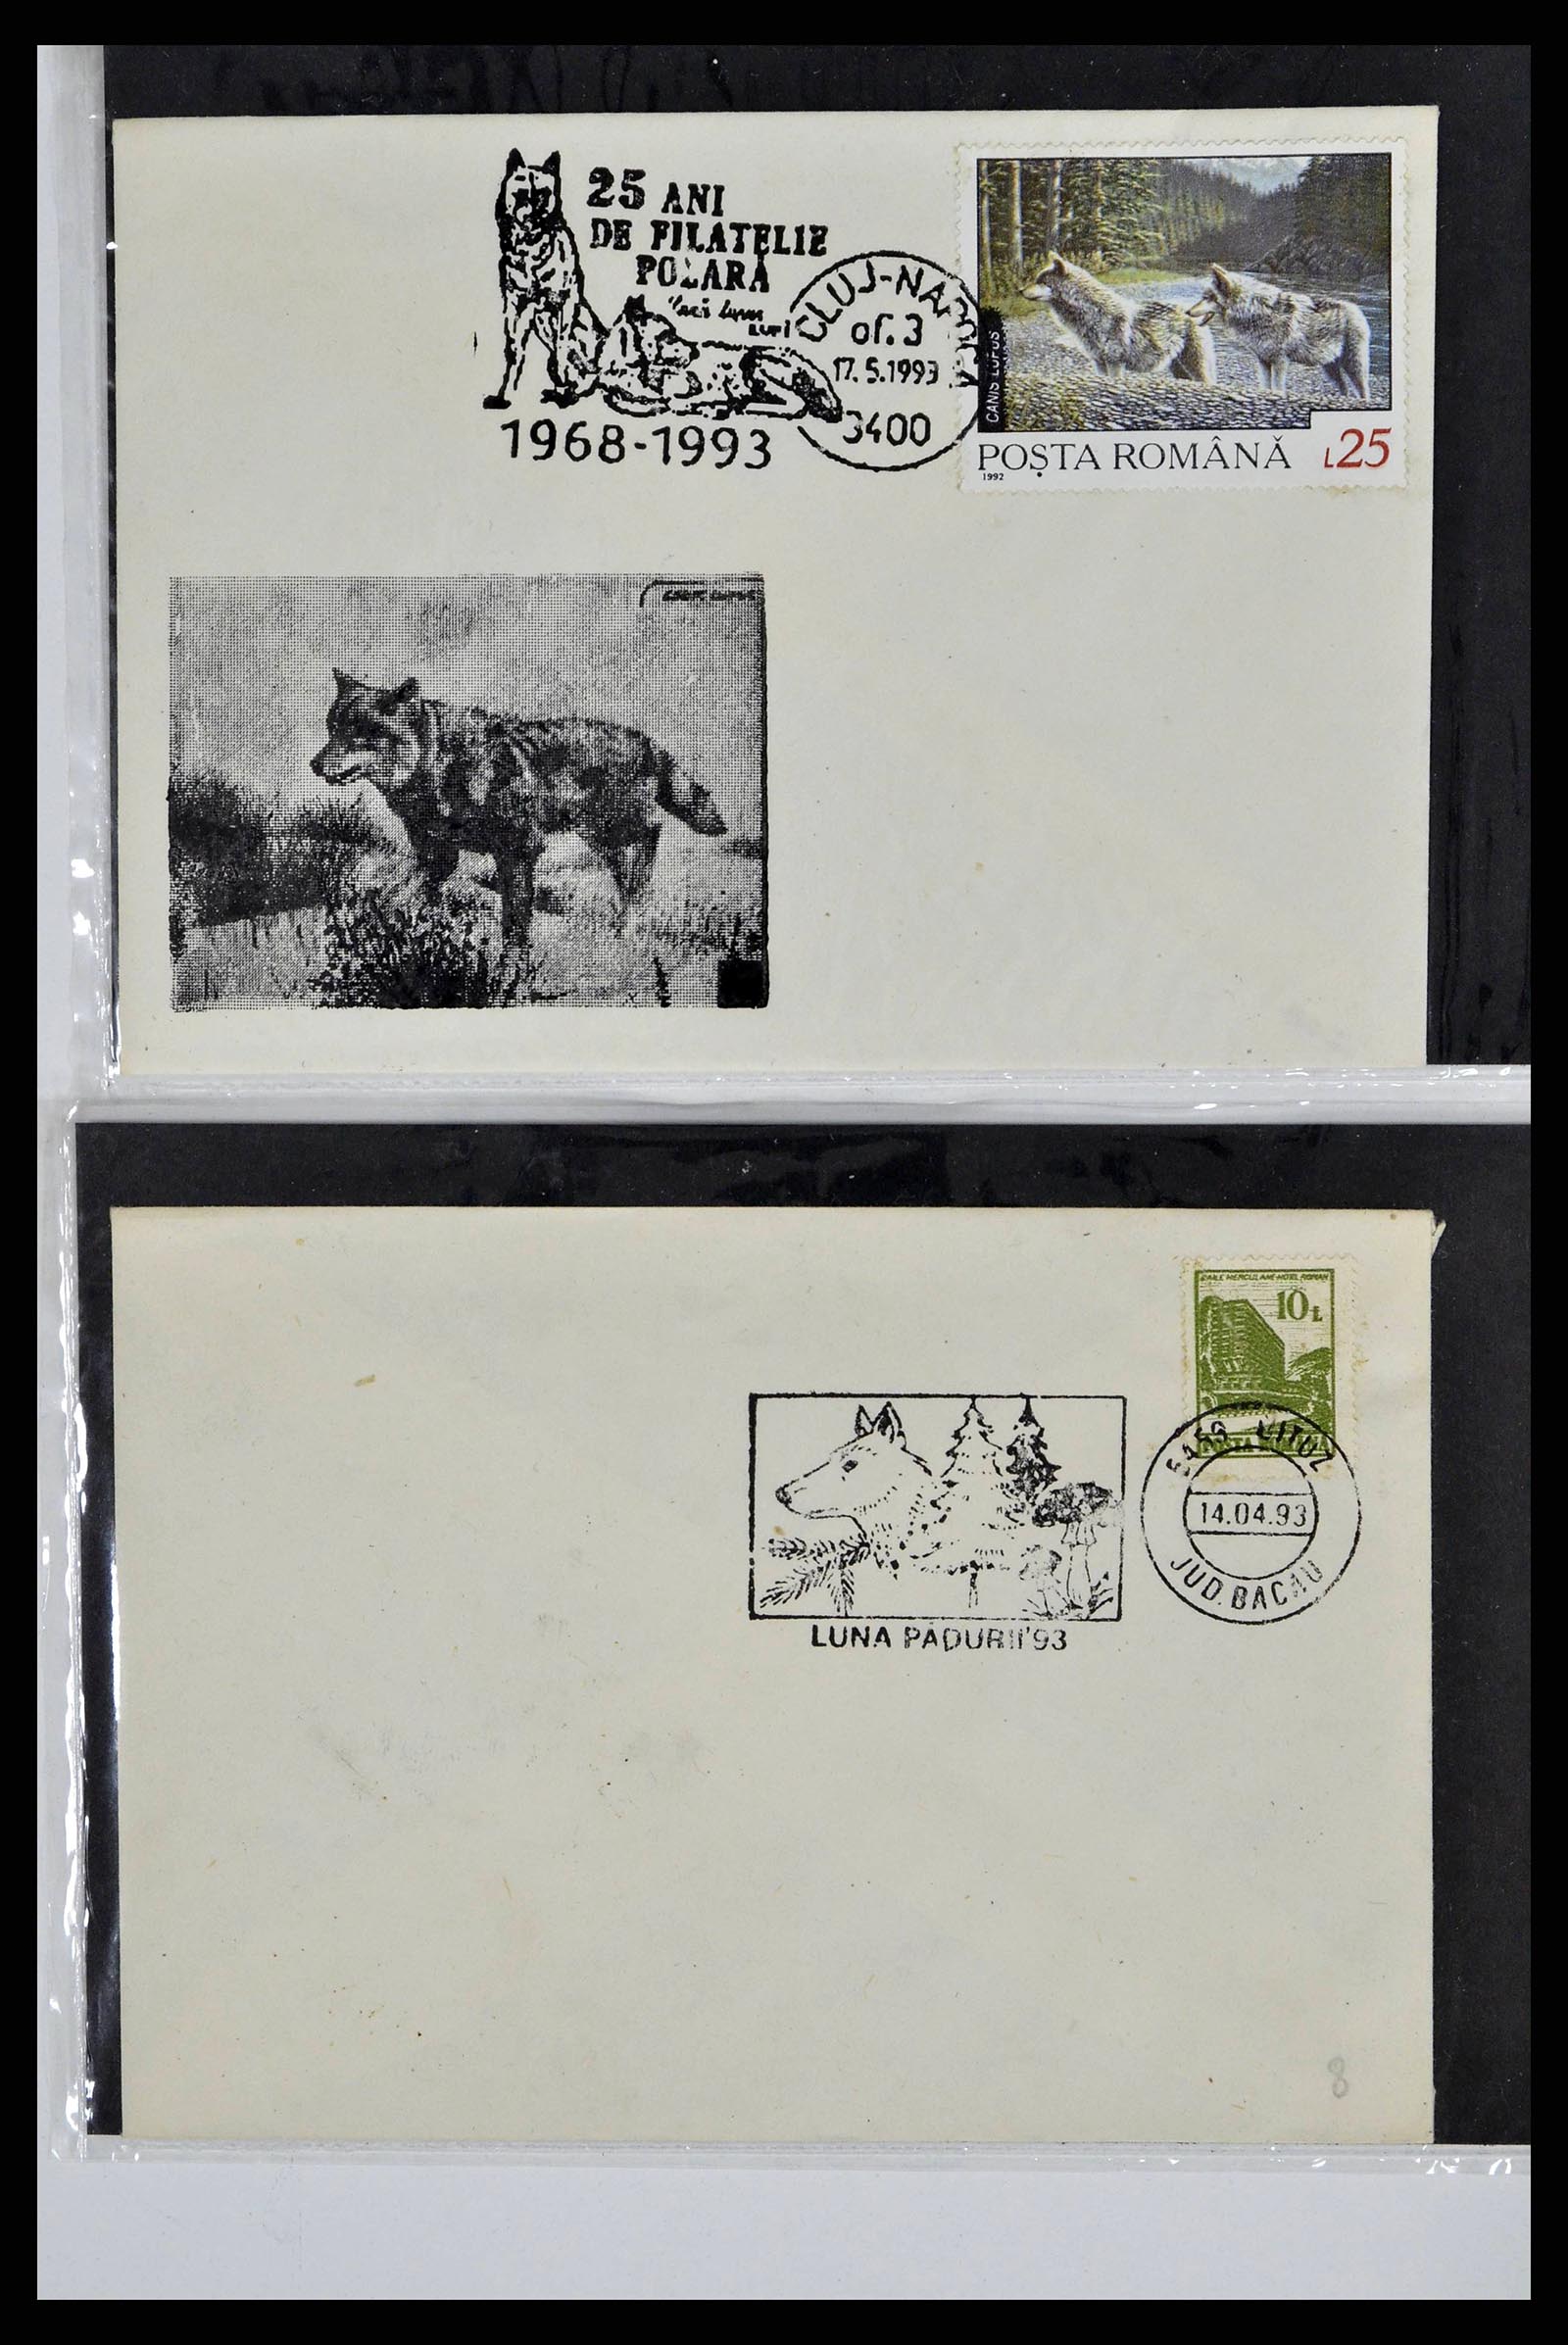 37673 0016 - Stamp collection 37673 Thematics dogs covers 1900-2000.